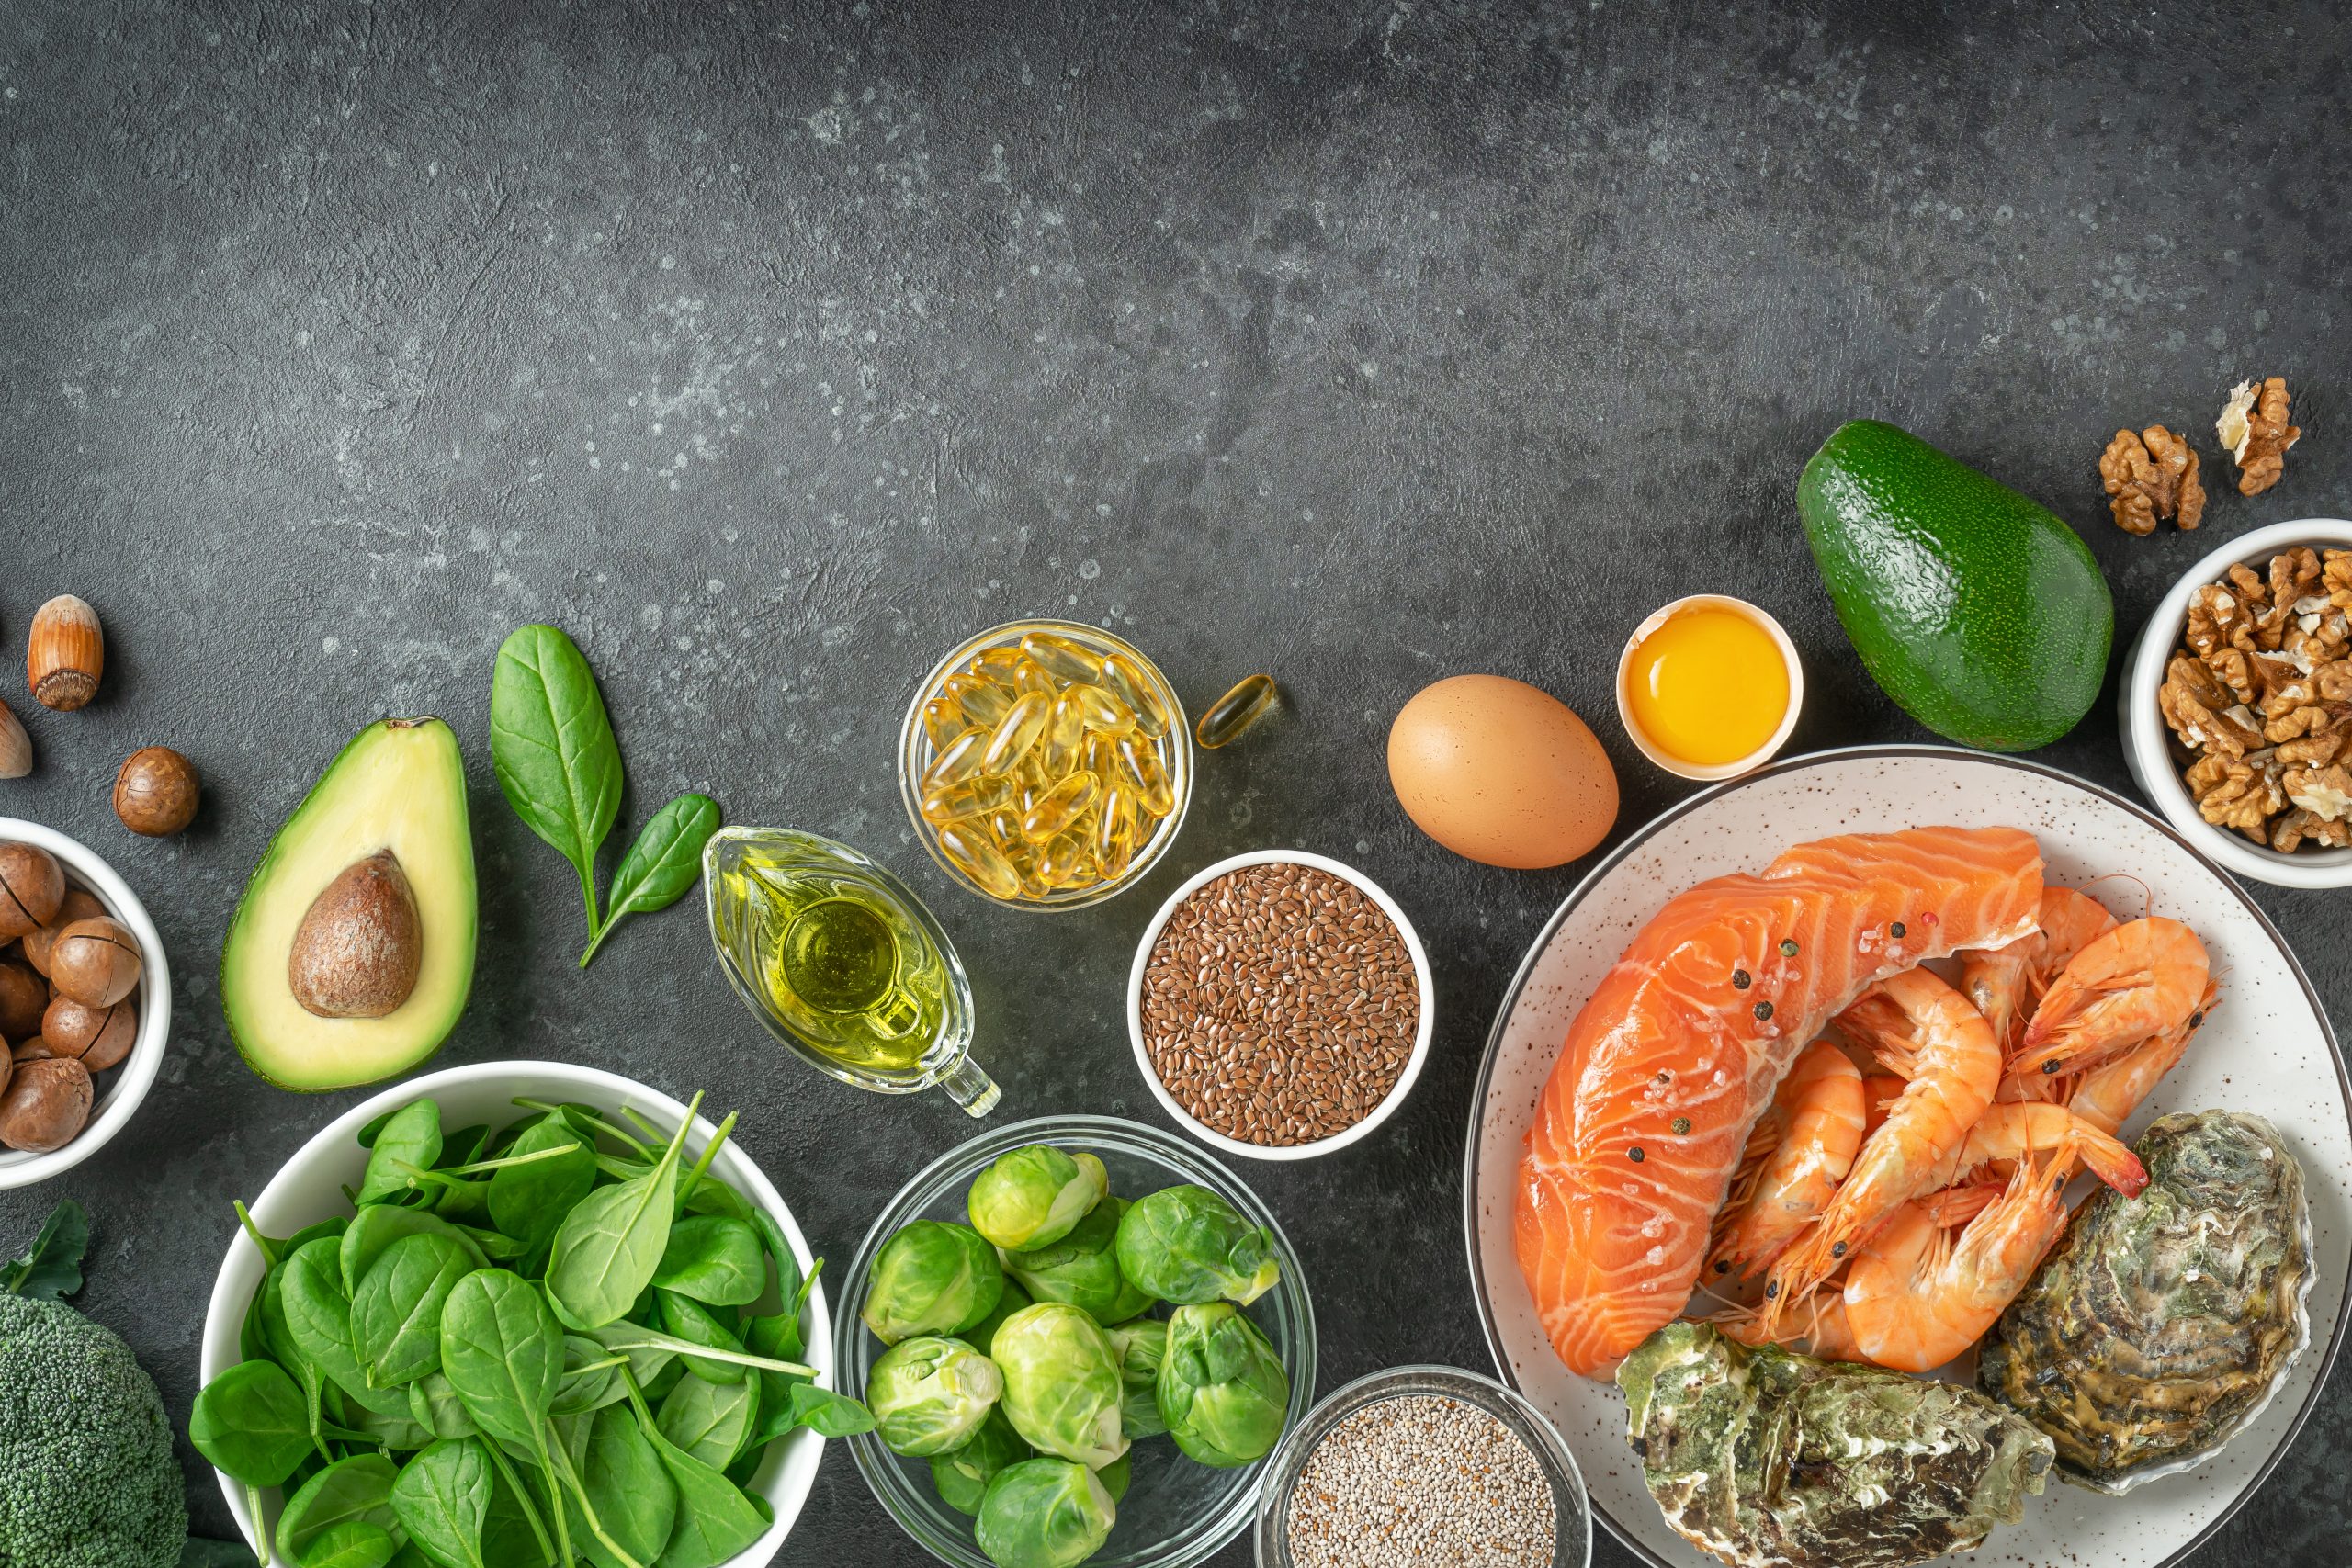 A selection of nutrient-dense foods suitable for both paleo and keto diets, featuring avocados, leafy greens, nuts, seeds, salmon, shrimp, eggs, and healthy oils. This image showcases the natural, whole foods emphasized in the paleo diet vs keto debate.